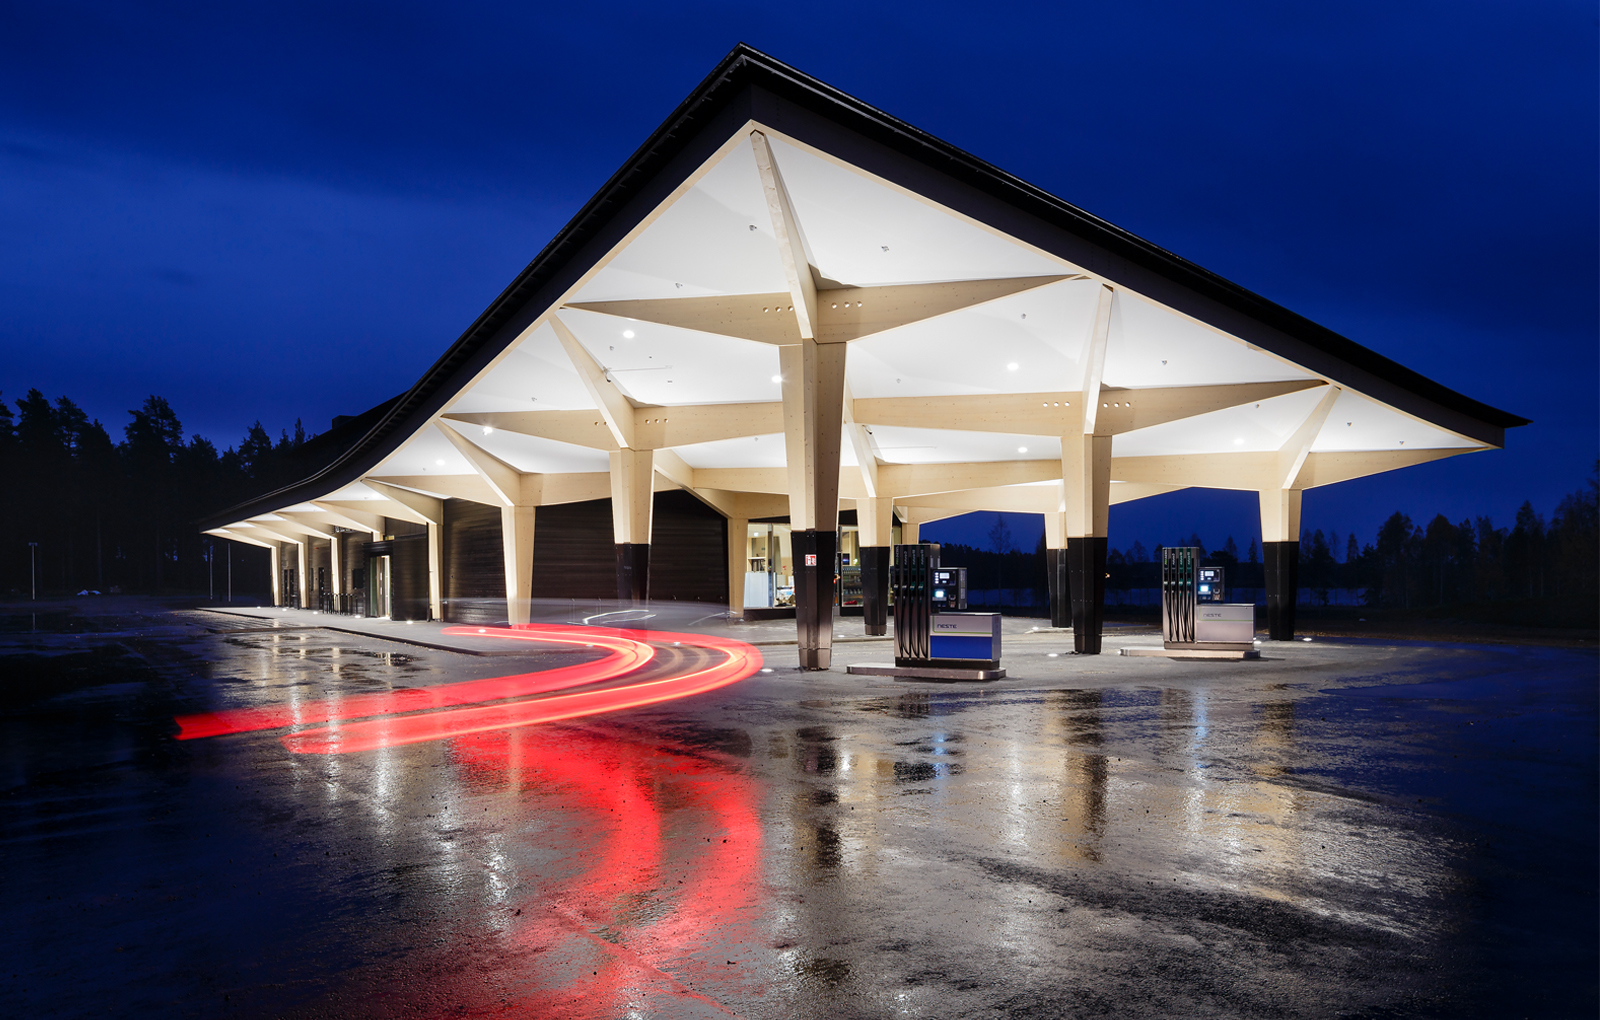 Rest Area Niemenharju fueling area main building canopy with wooden columns Designed by Studio Puisto Architects